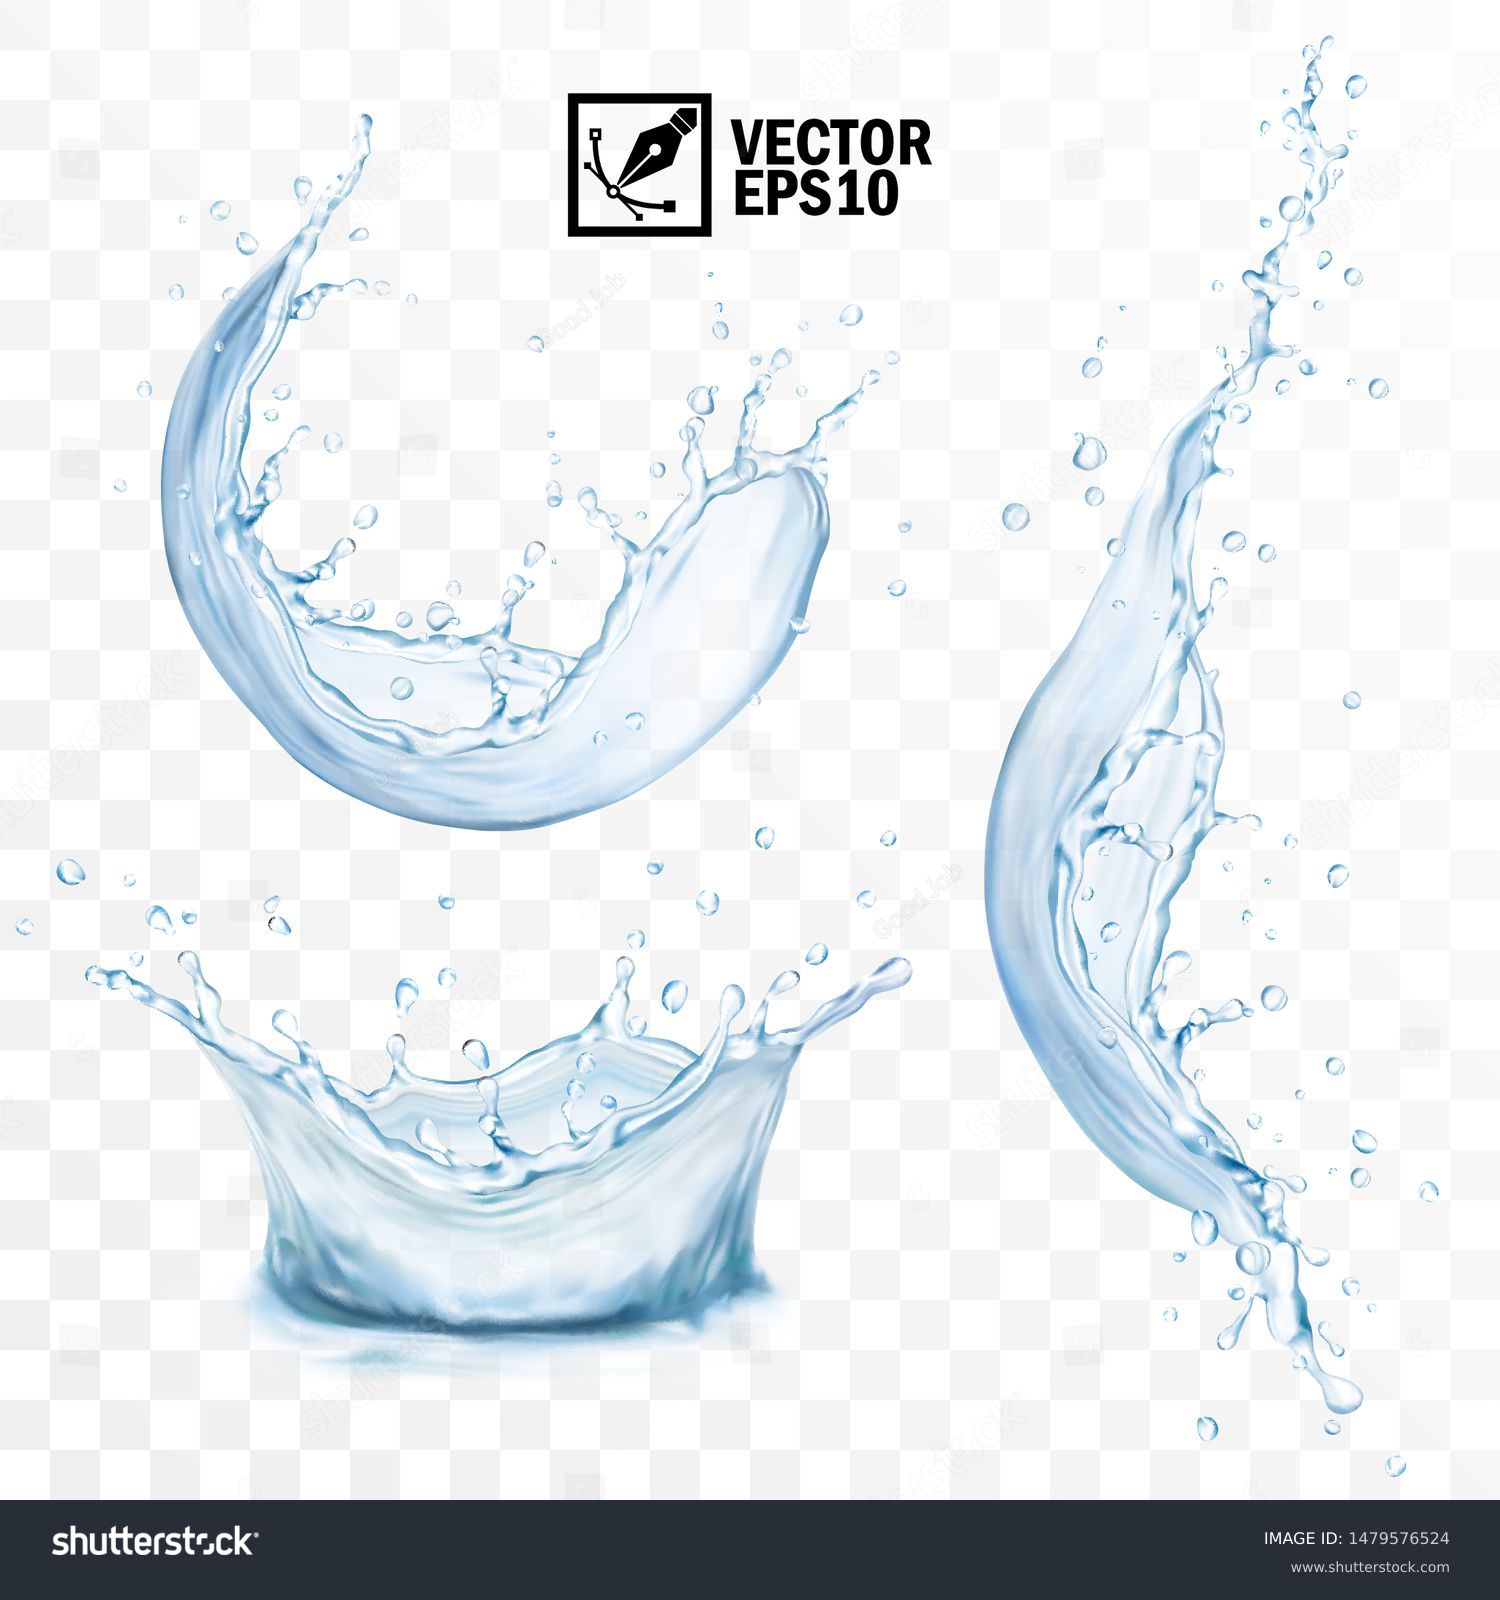 Realistic transparent isolated vector set splash of water with drops, a splash of falling water, a splash in the form of a crown, a splash in the form of a circle